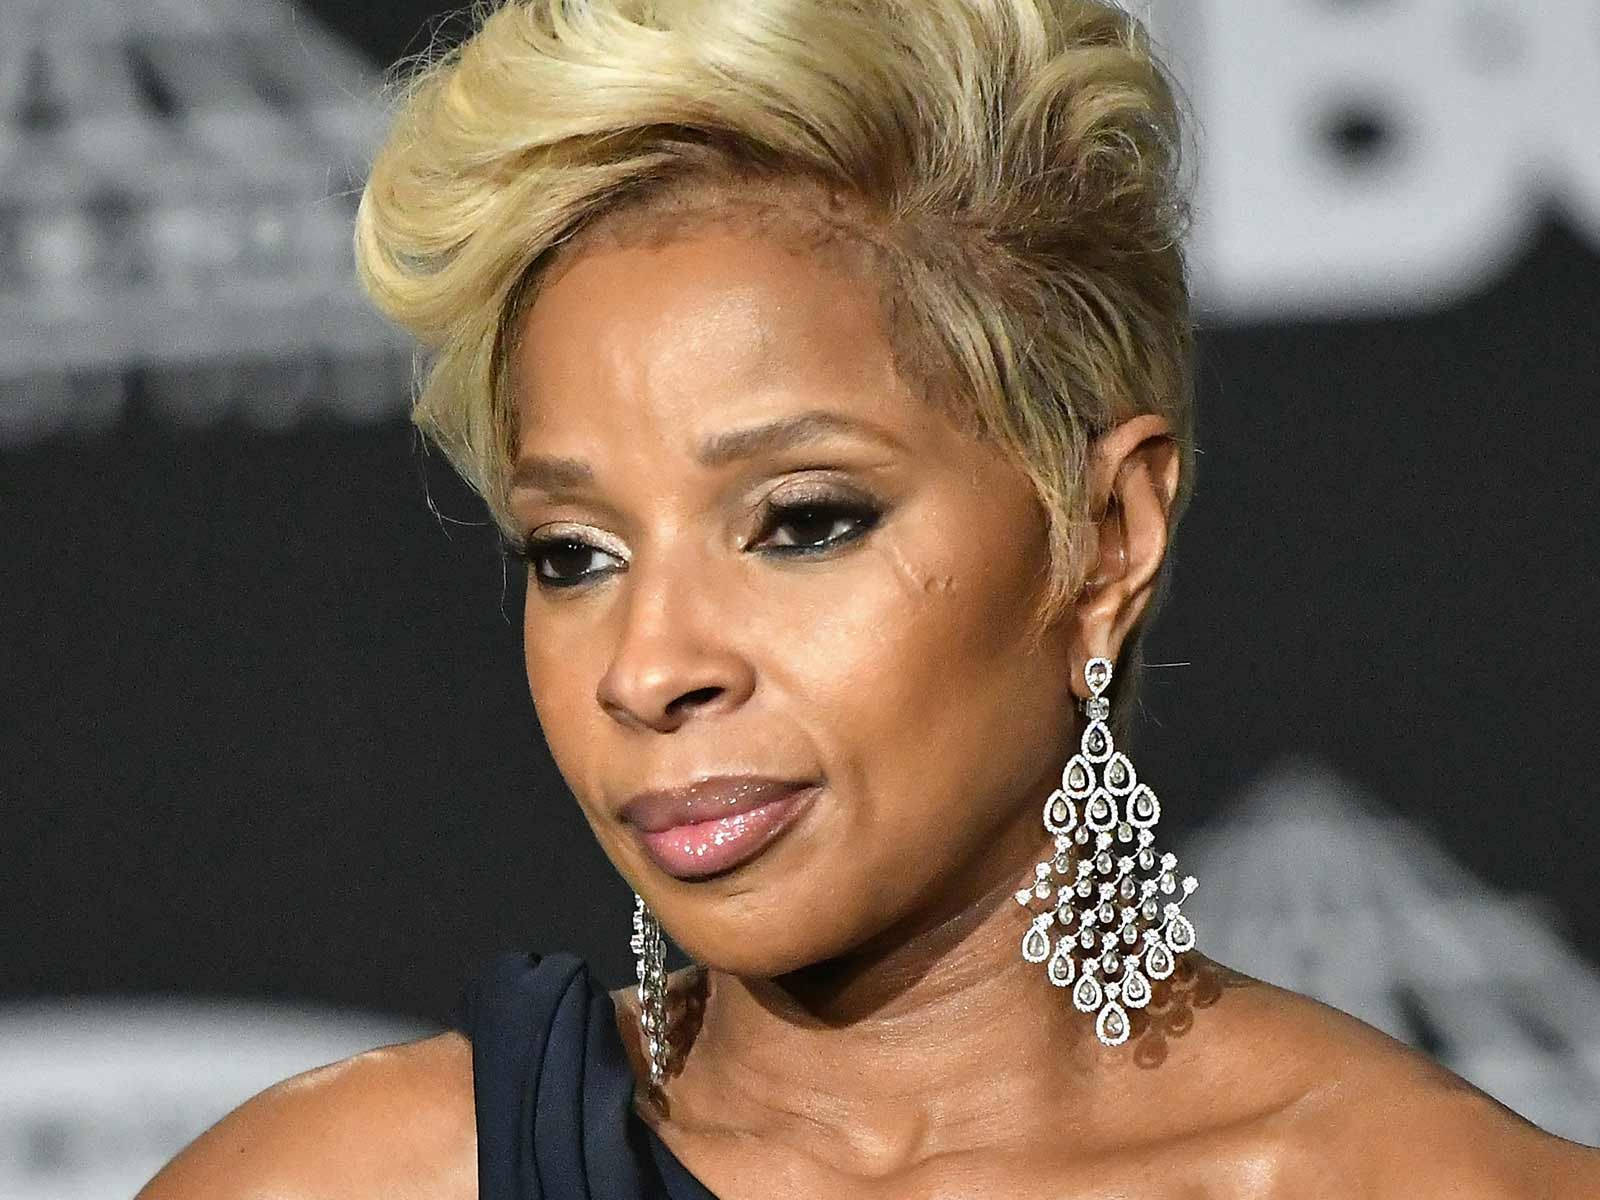 Queen Of R&b Mary J. Blige In Pixie Cut Background